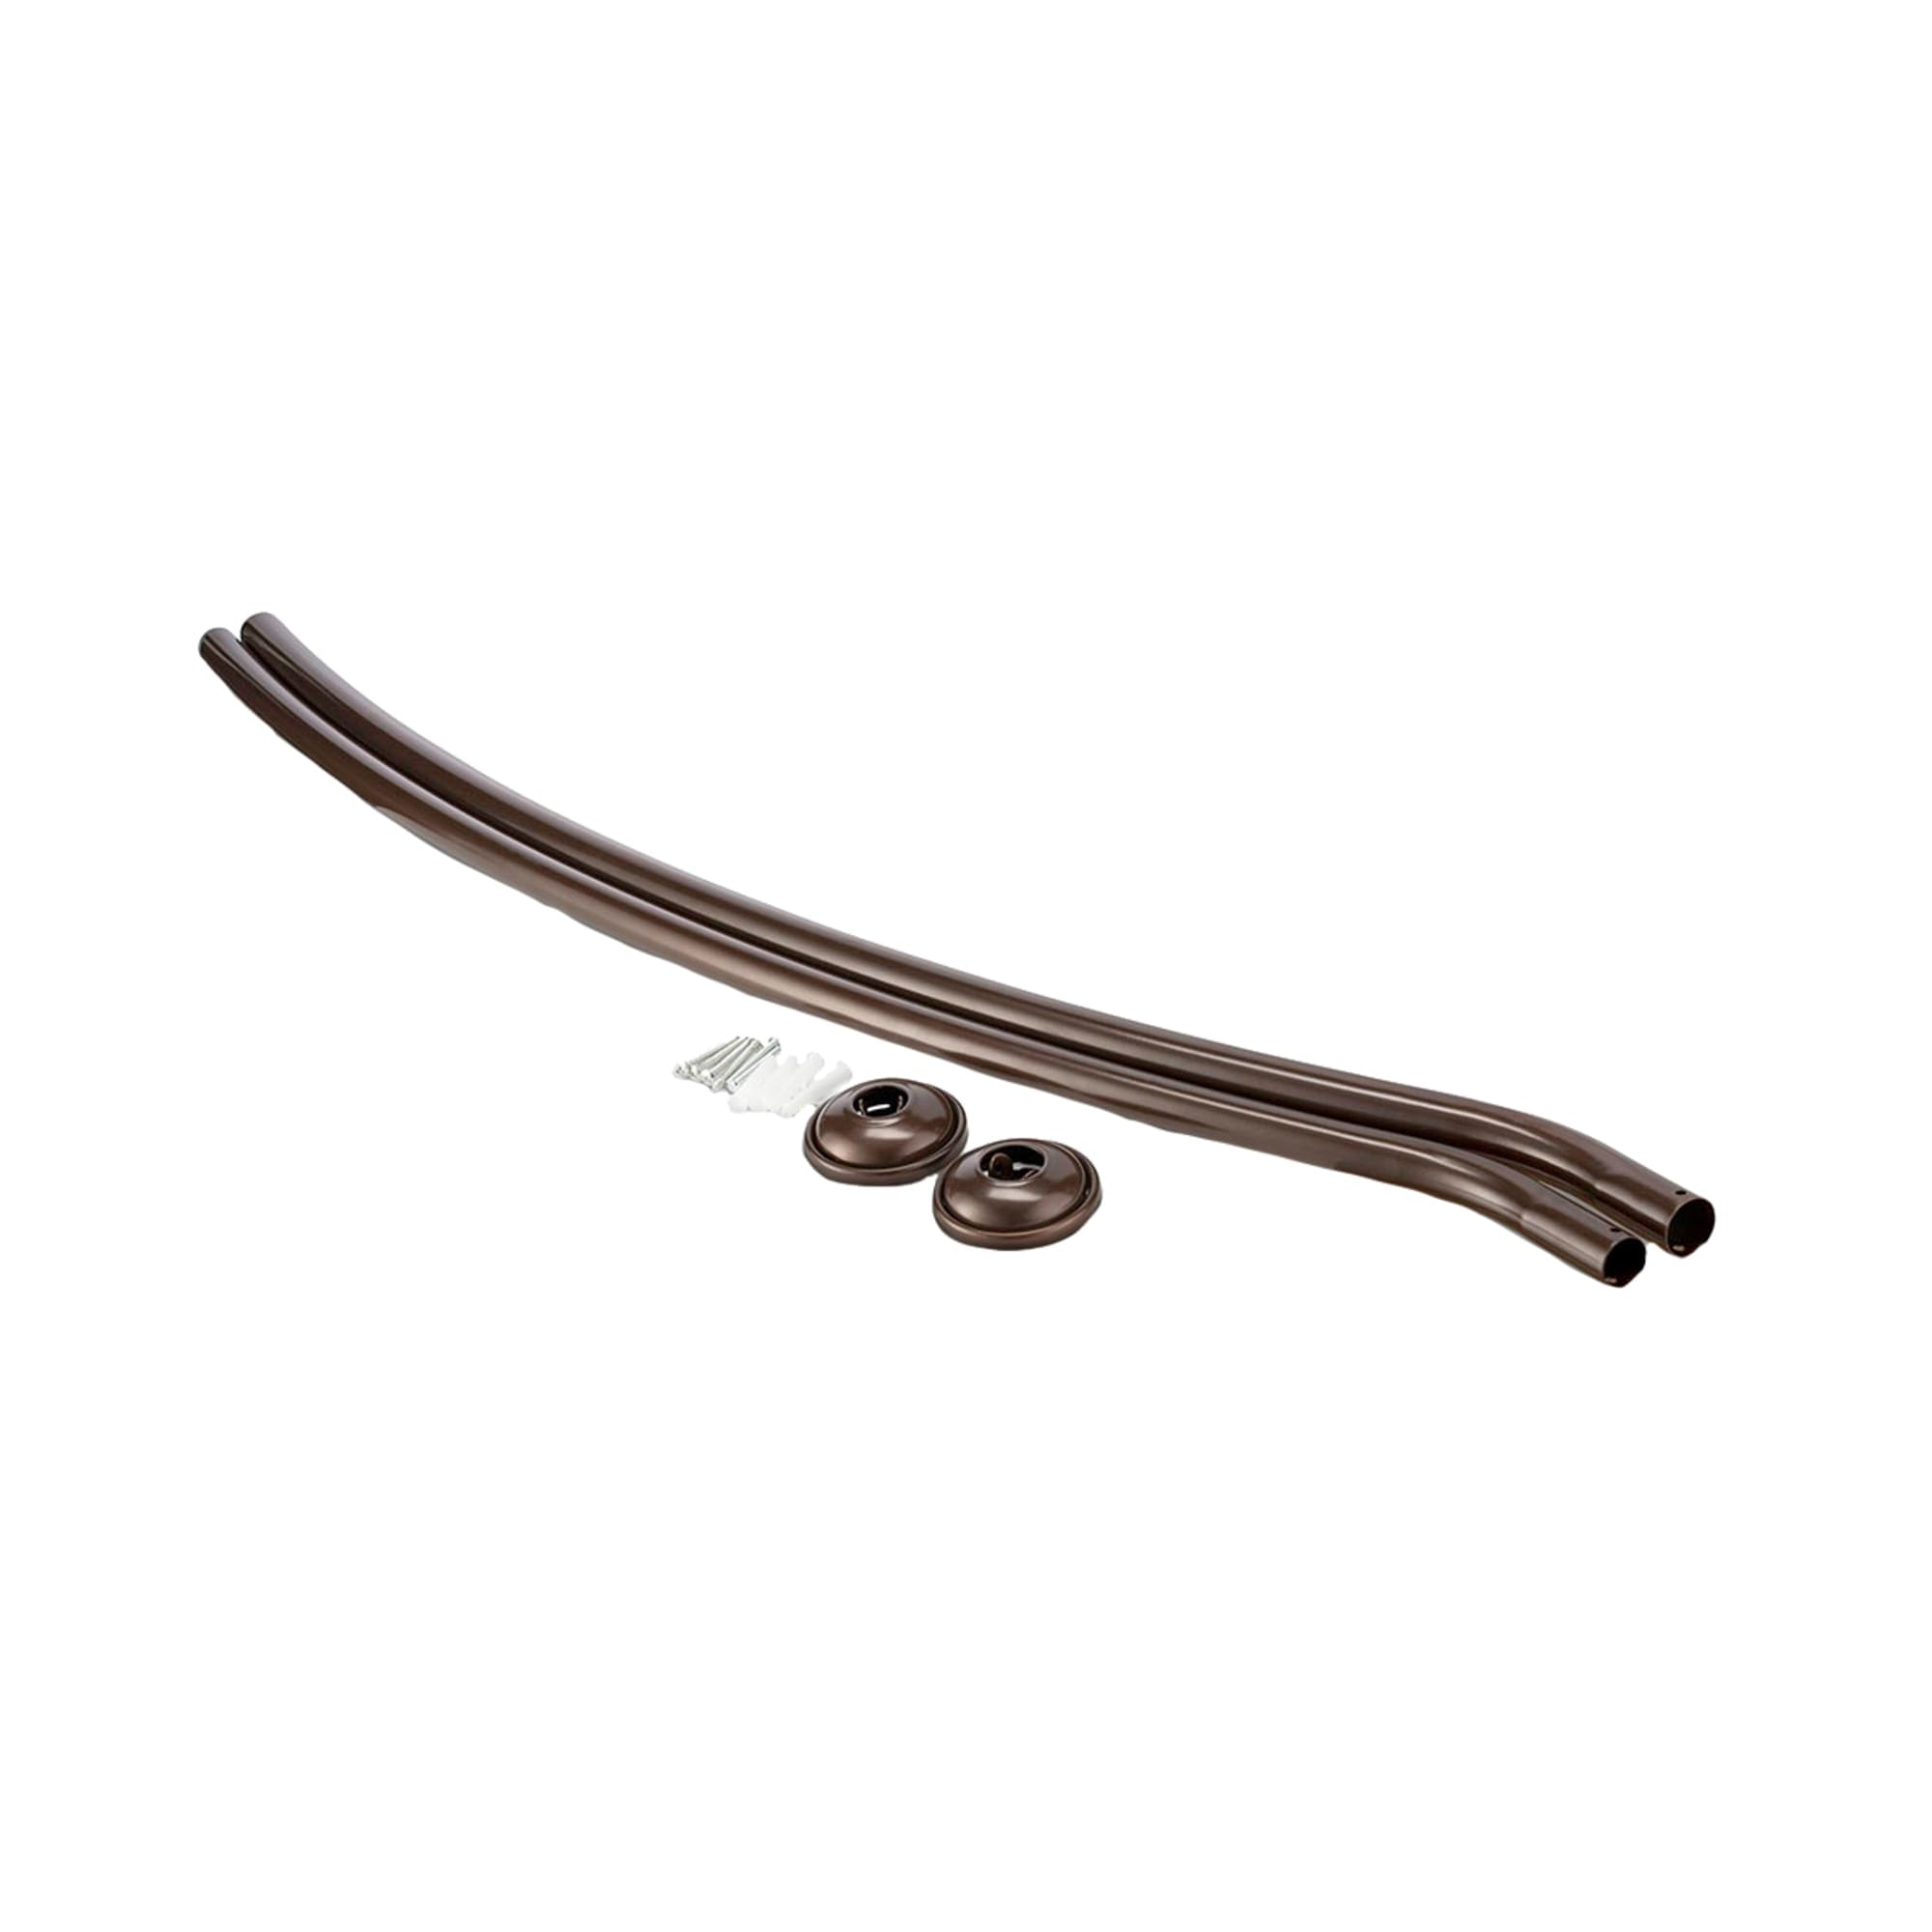 Home Basics Steel Curved Shower Rod, Bronze $15.00 EACH, CASE PACK OF 8